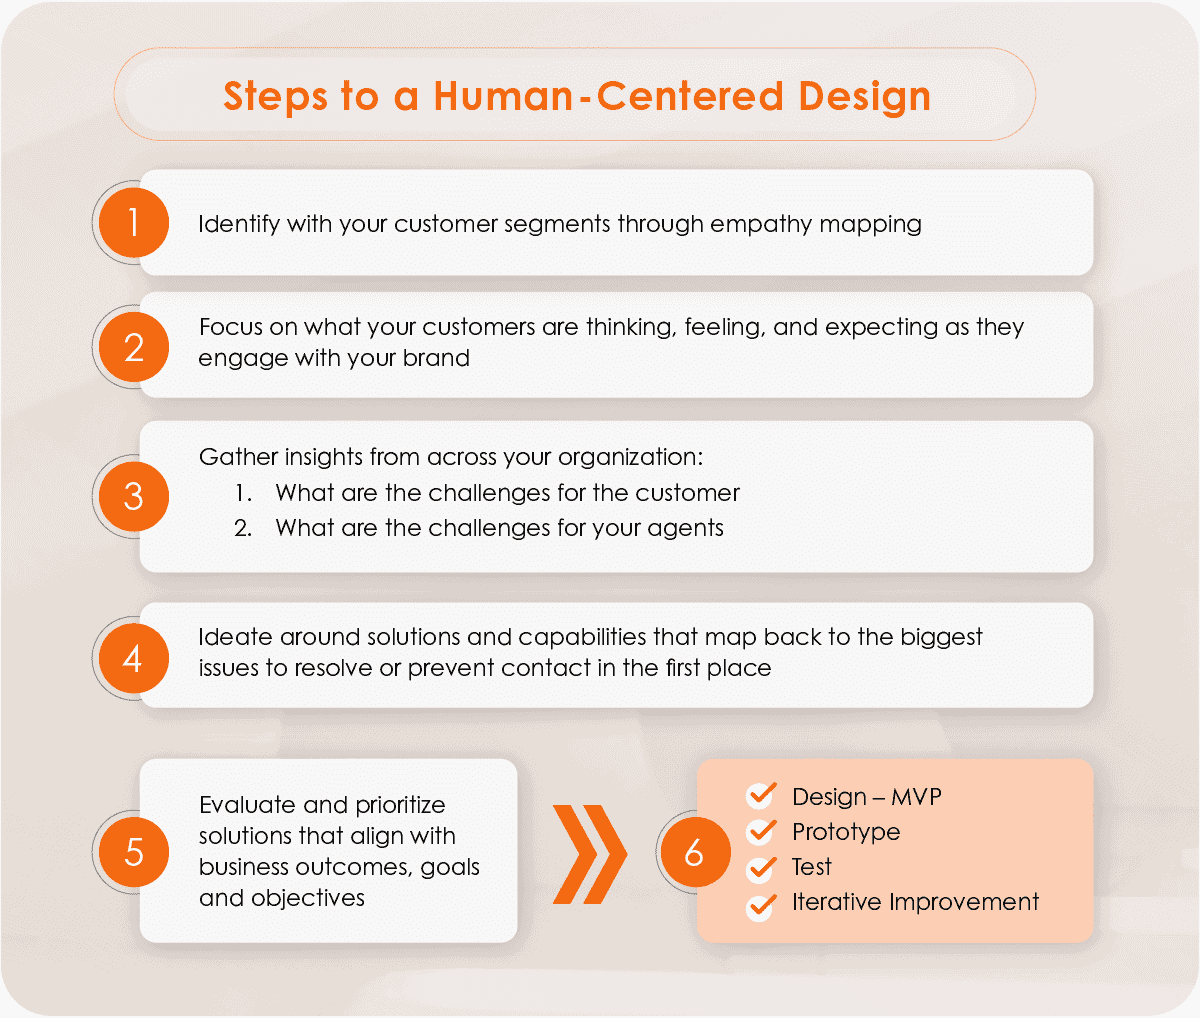 Six-step process for Human-Centered Design, including empathy mapping, customer understanding, organizational insights, solution ideation, evaluation, and MVP design.